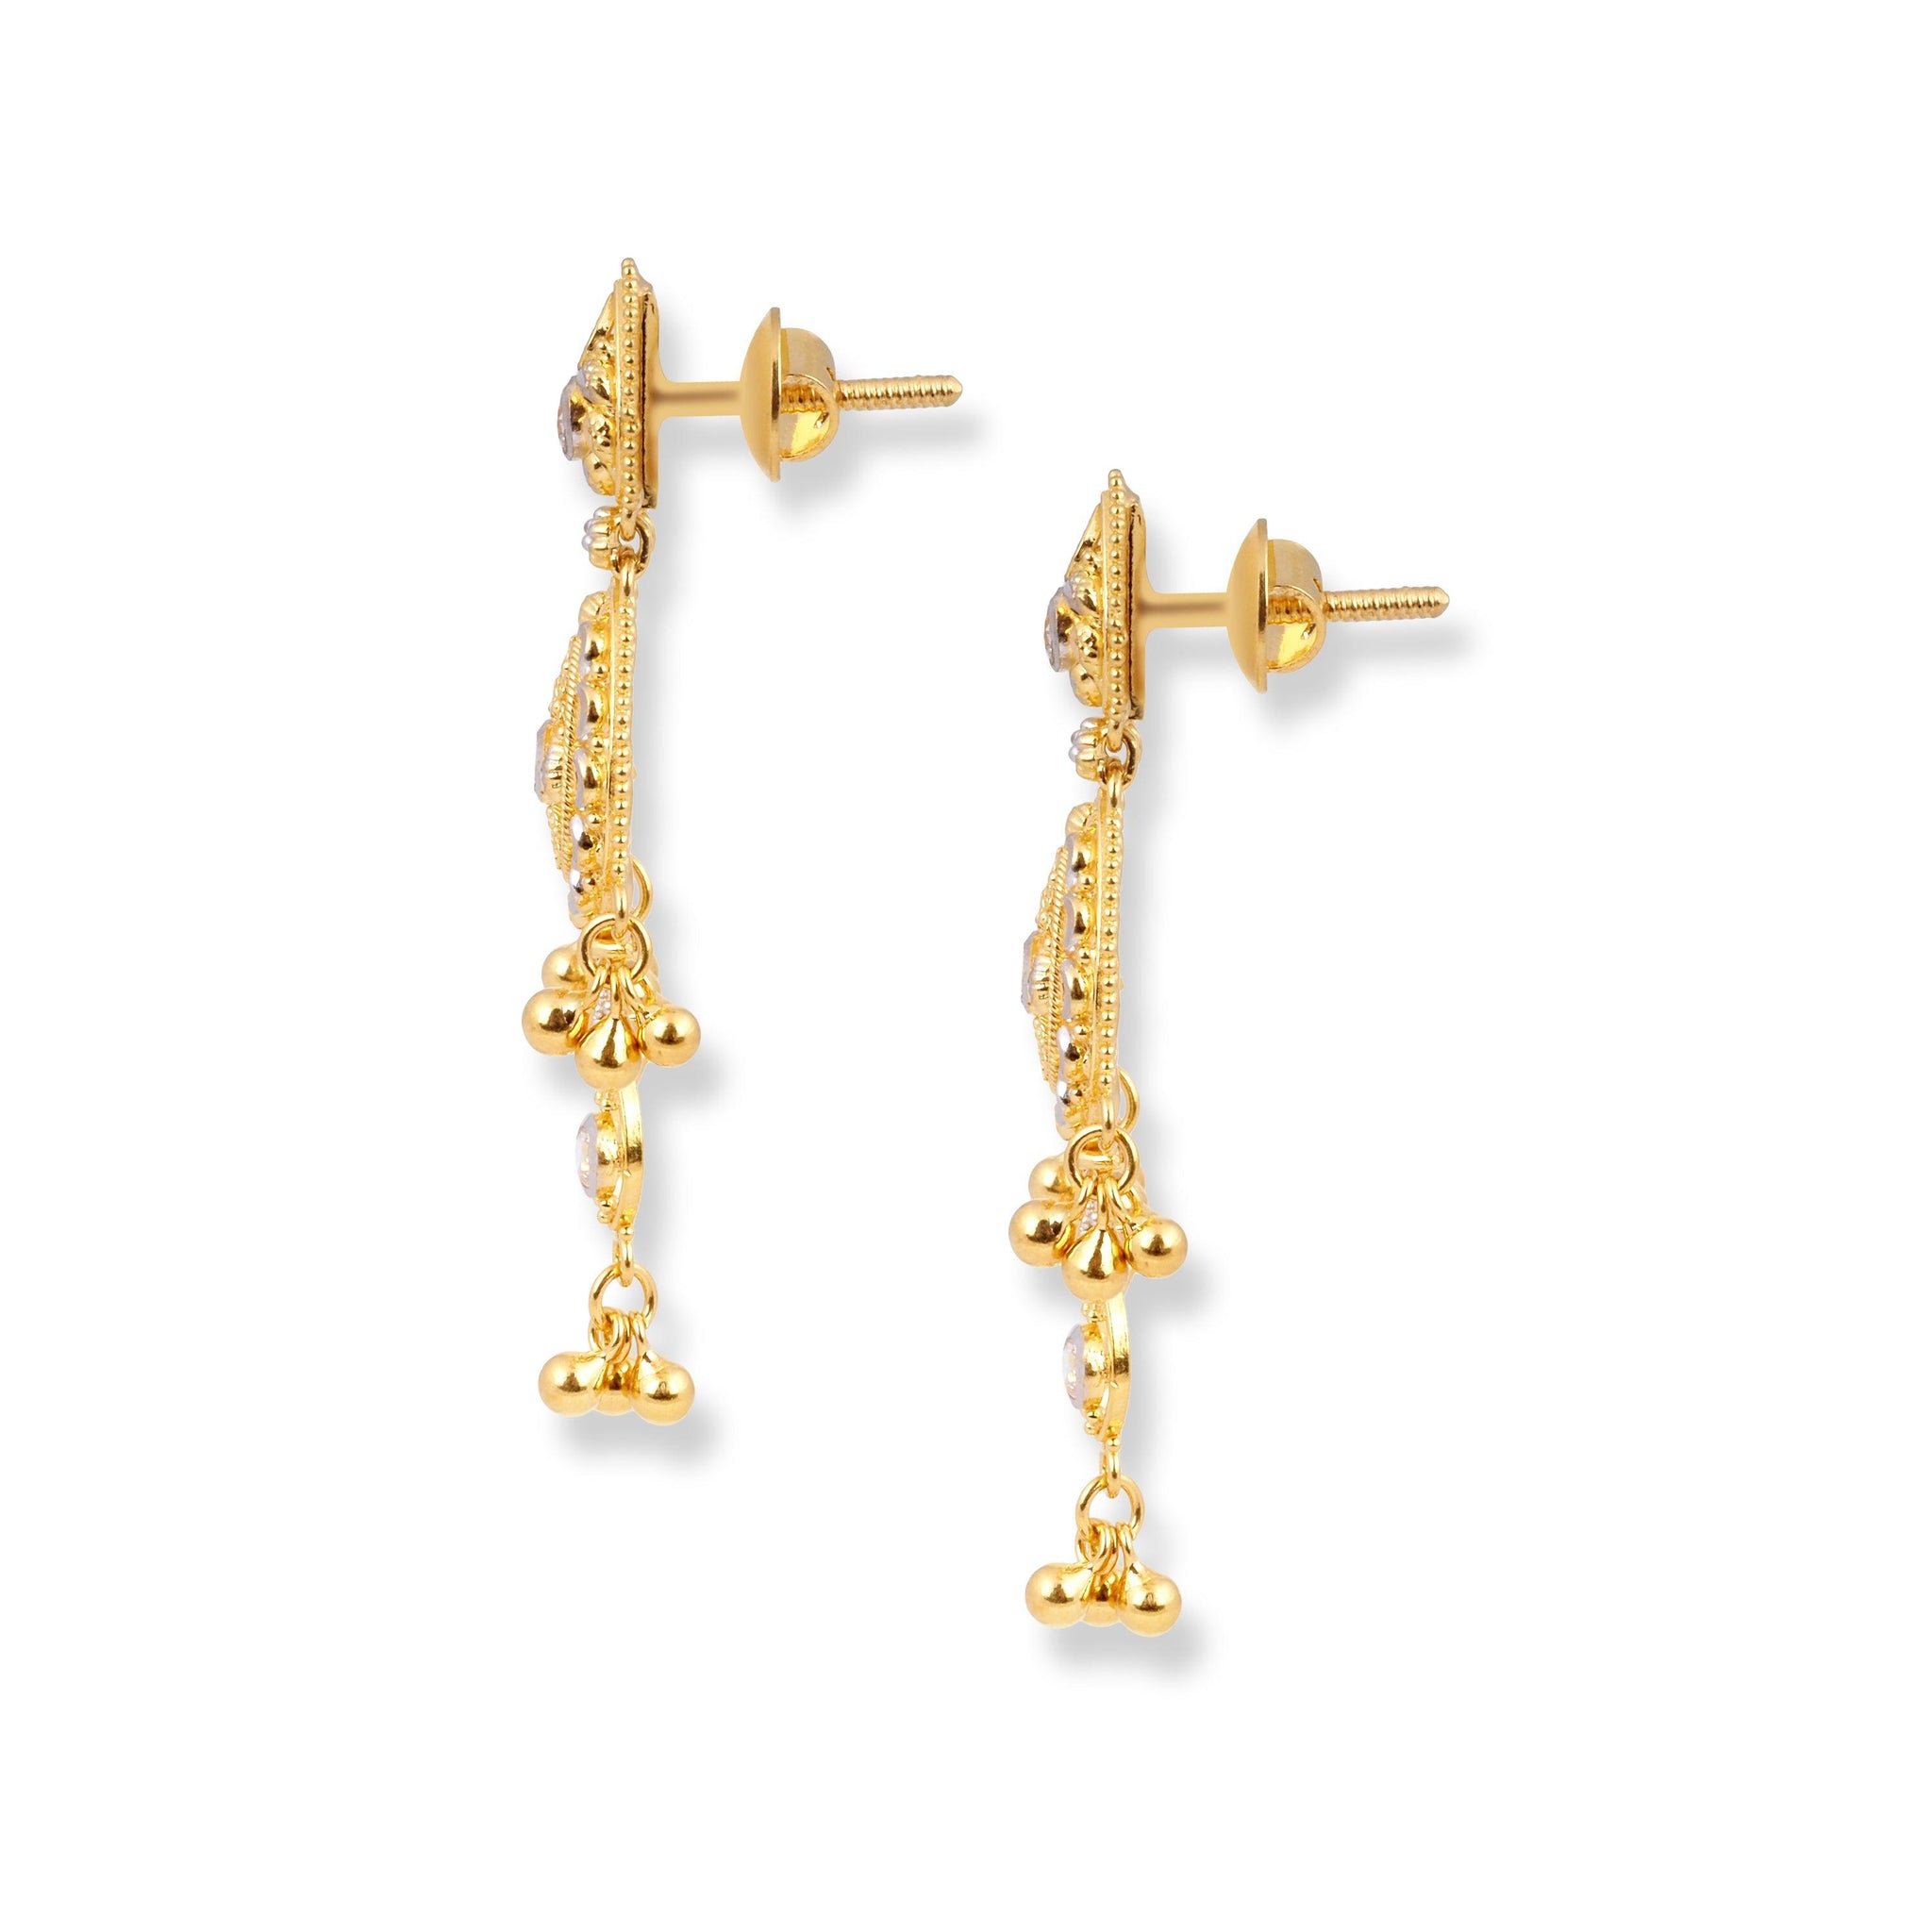 22ct Yellow Gold Necklace & Earrings in Cubic Zirconia Stones & Rhodium Plating Design.